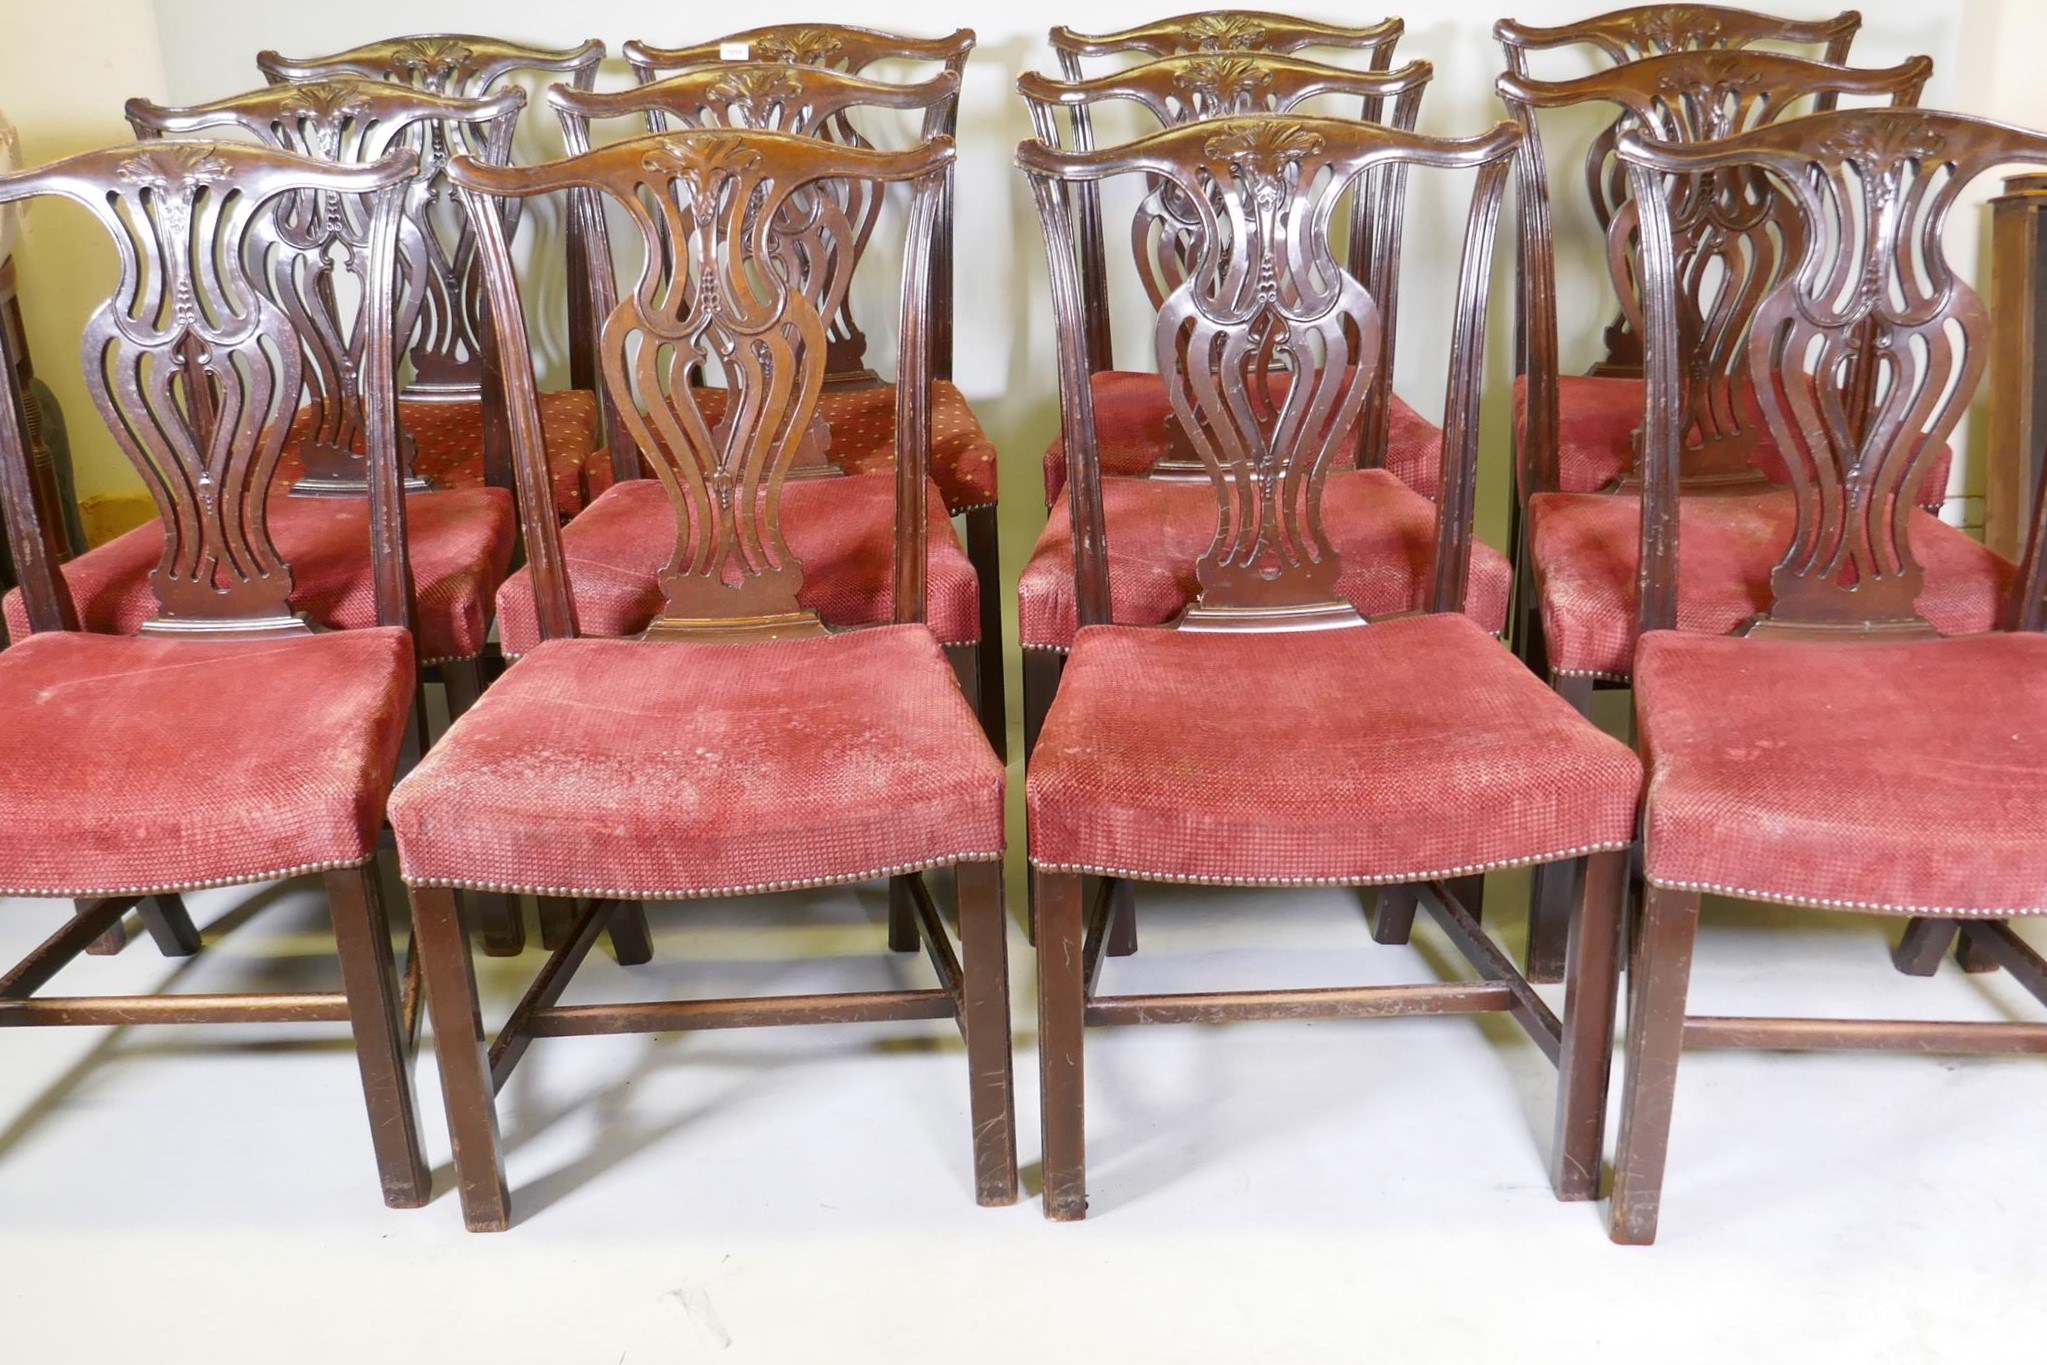 A set of twelve Chippendale style mahogany dining chairs with pierced and carved splat backs over